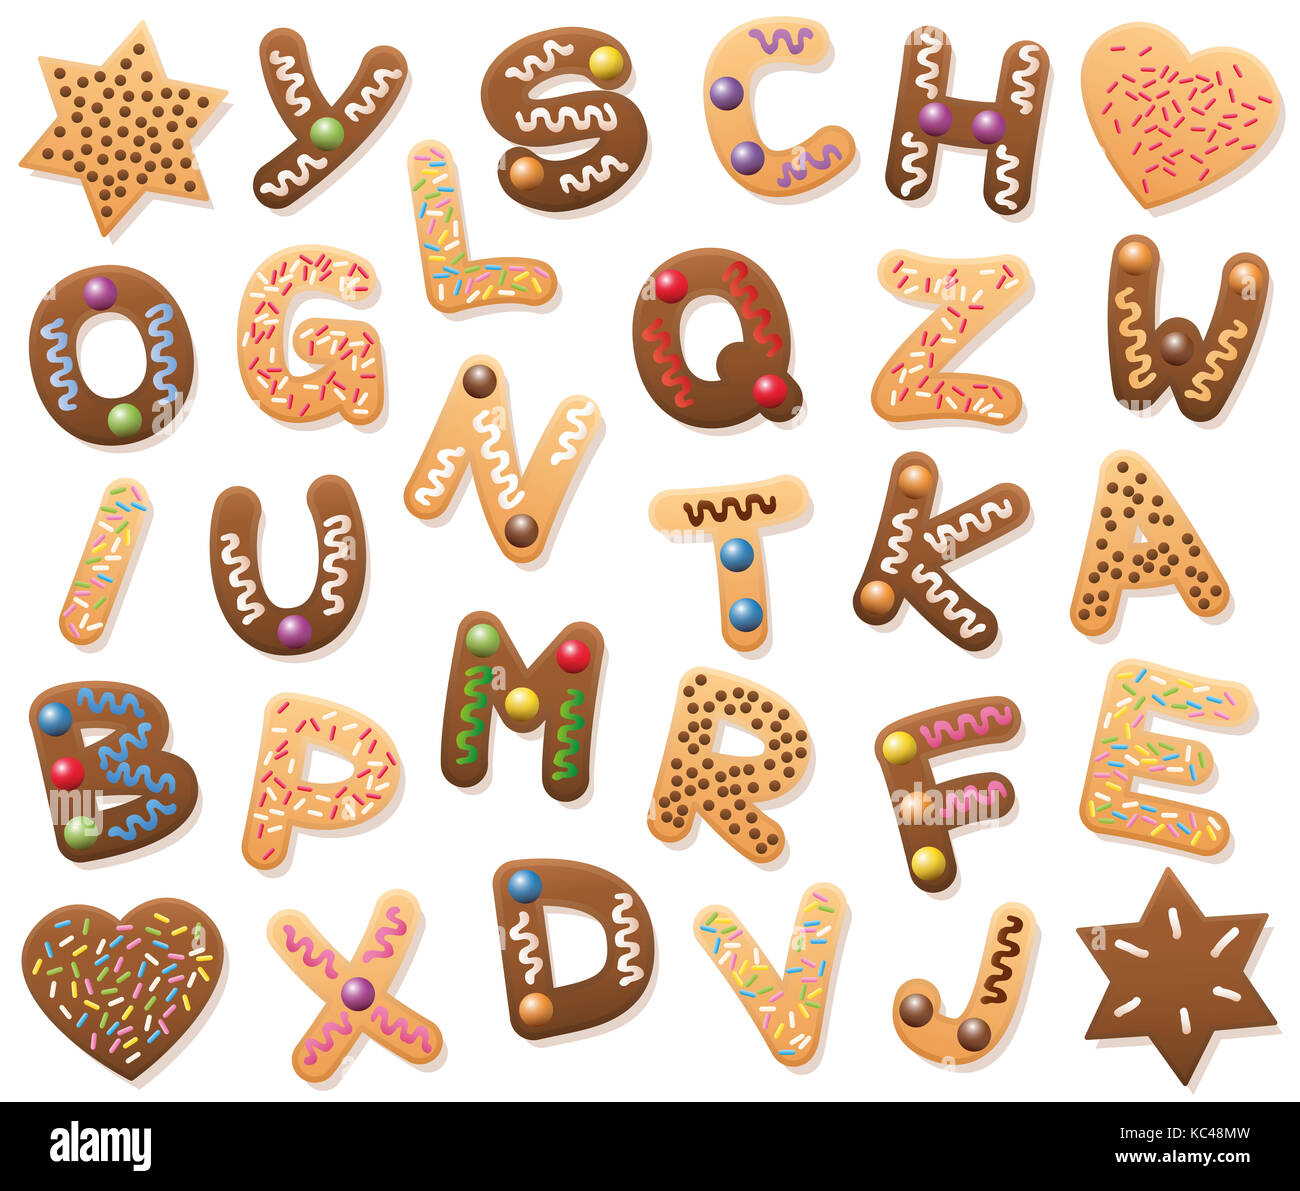 Christmas cookies ABC - loosely arranged. Find all letters of the alphabet, or bring the mixed up letters in the right order from A to Z. Educational Stock Photo